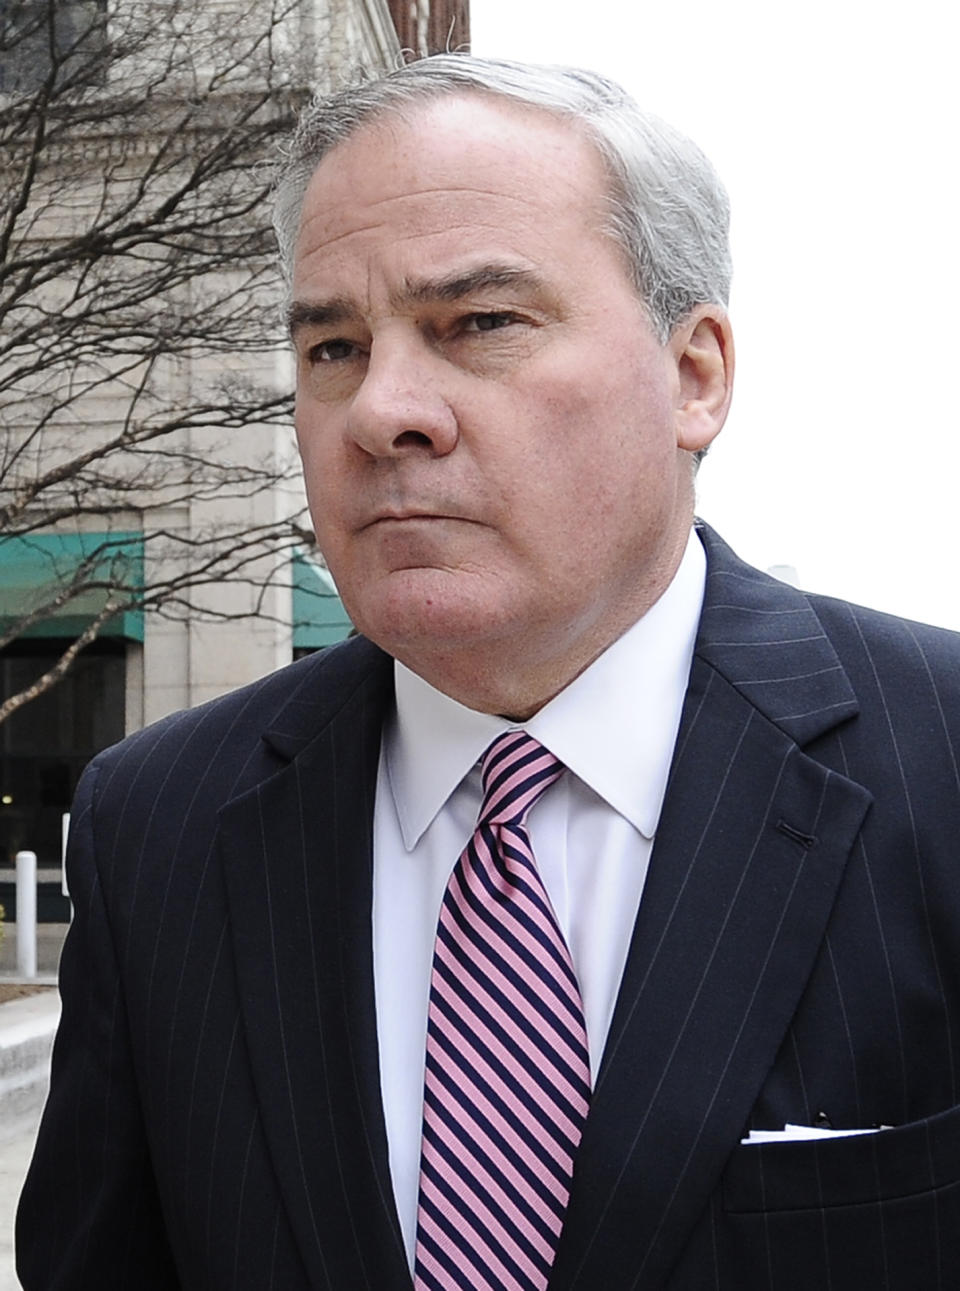 Former Connecticut Gov. John G. Rowland arrives at federal court, Friday, April 11, 2014, in New Haven, Conn. A grand jury on Thursday returned a seven-count indictment alleging Rowland schemed to conceal involvement with congressional campaigns. (AP Photo/Jessica Hill)